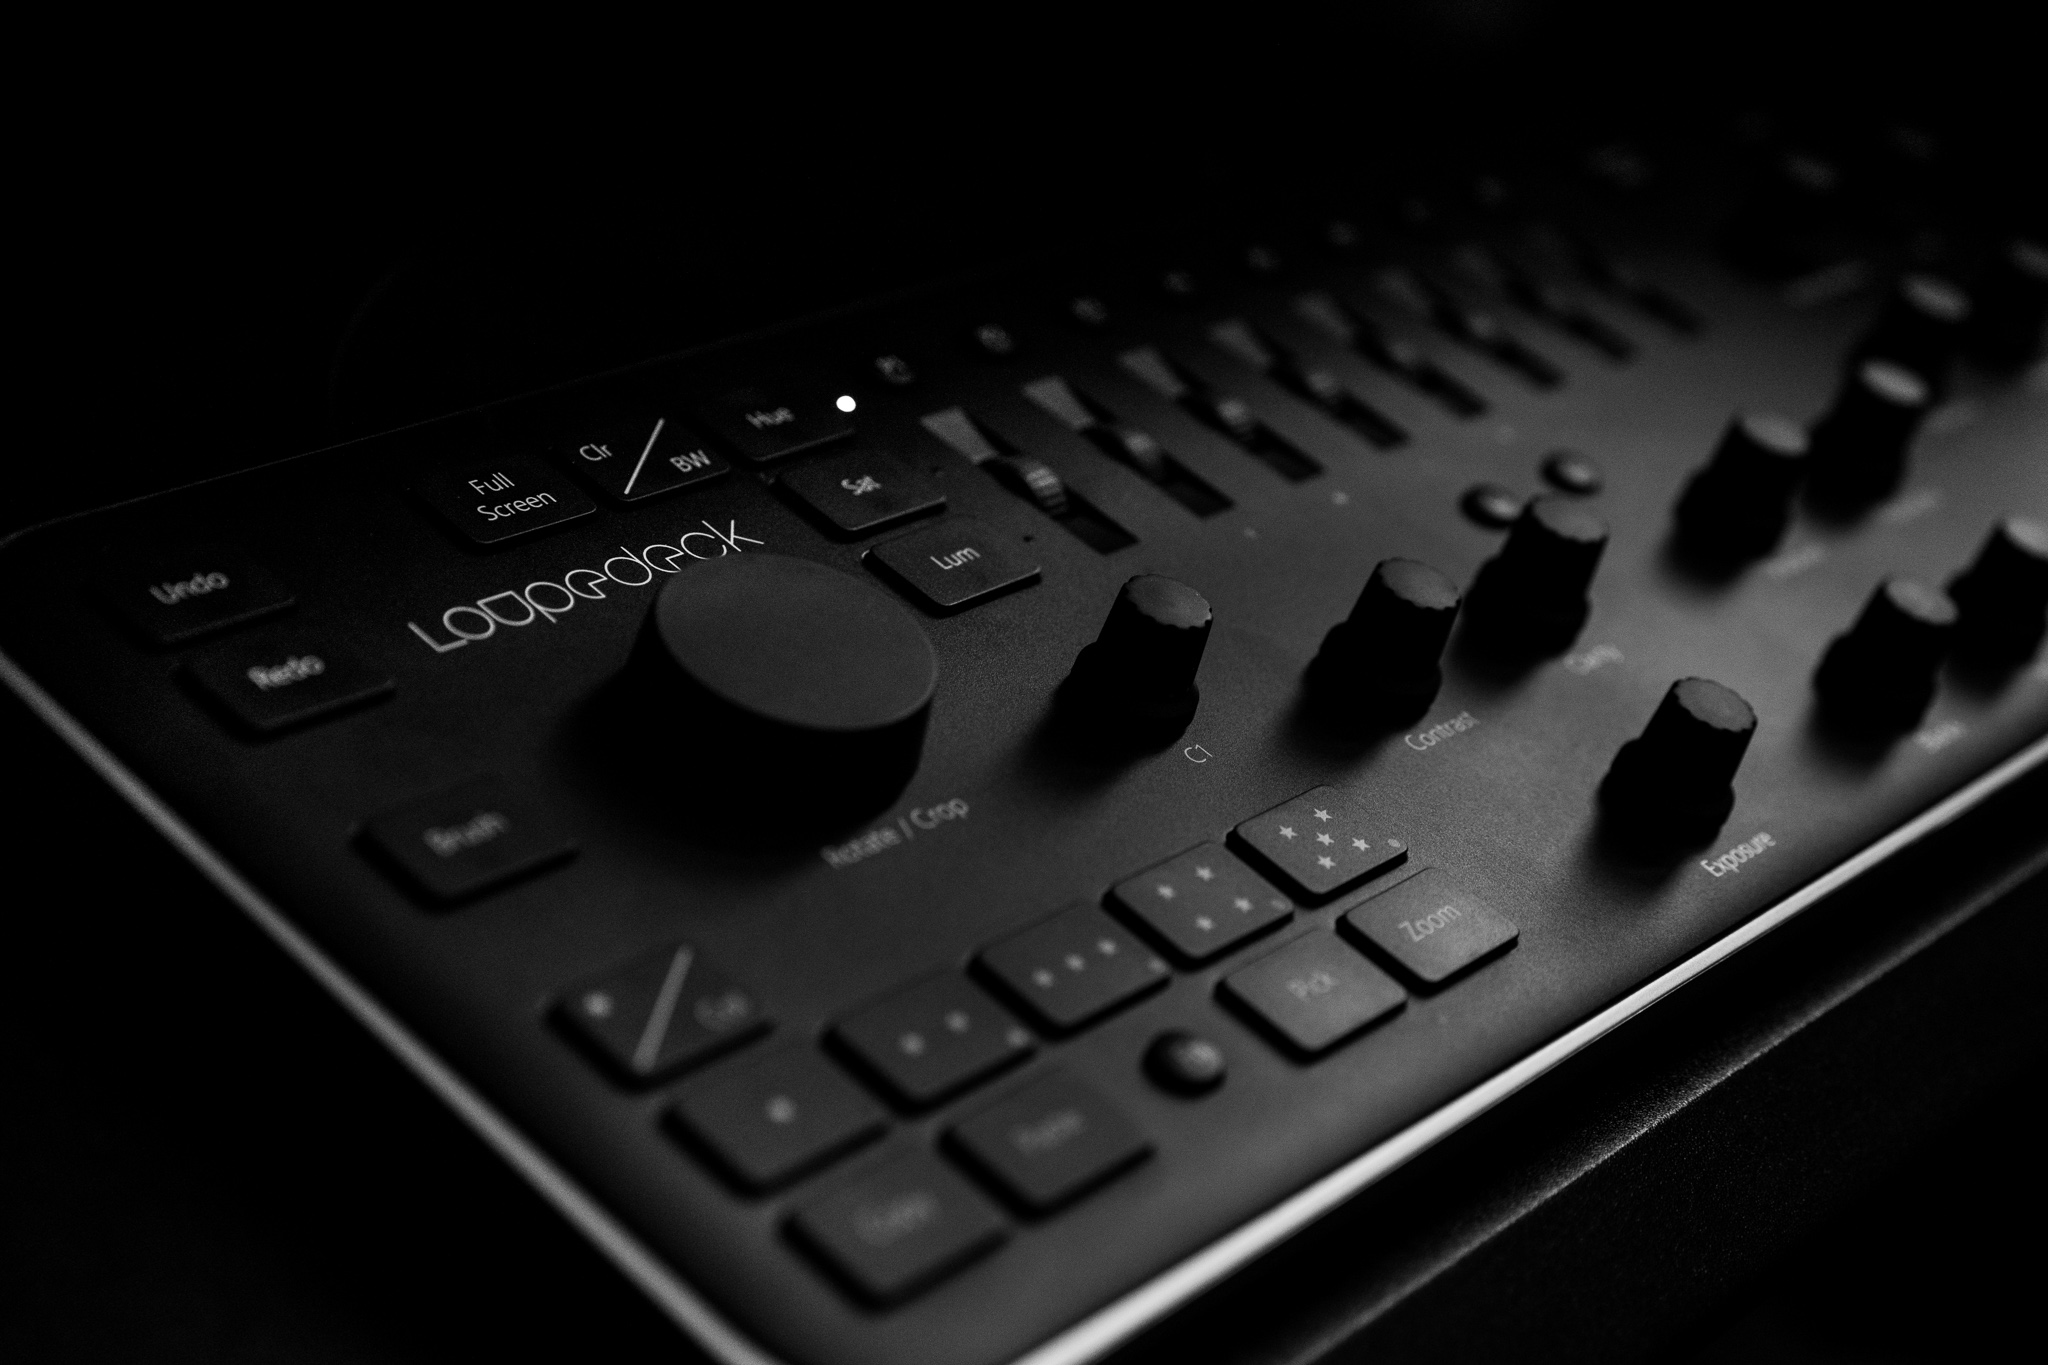 Review: Loupedeck+ Brings Improvements Over the Original Version